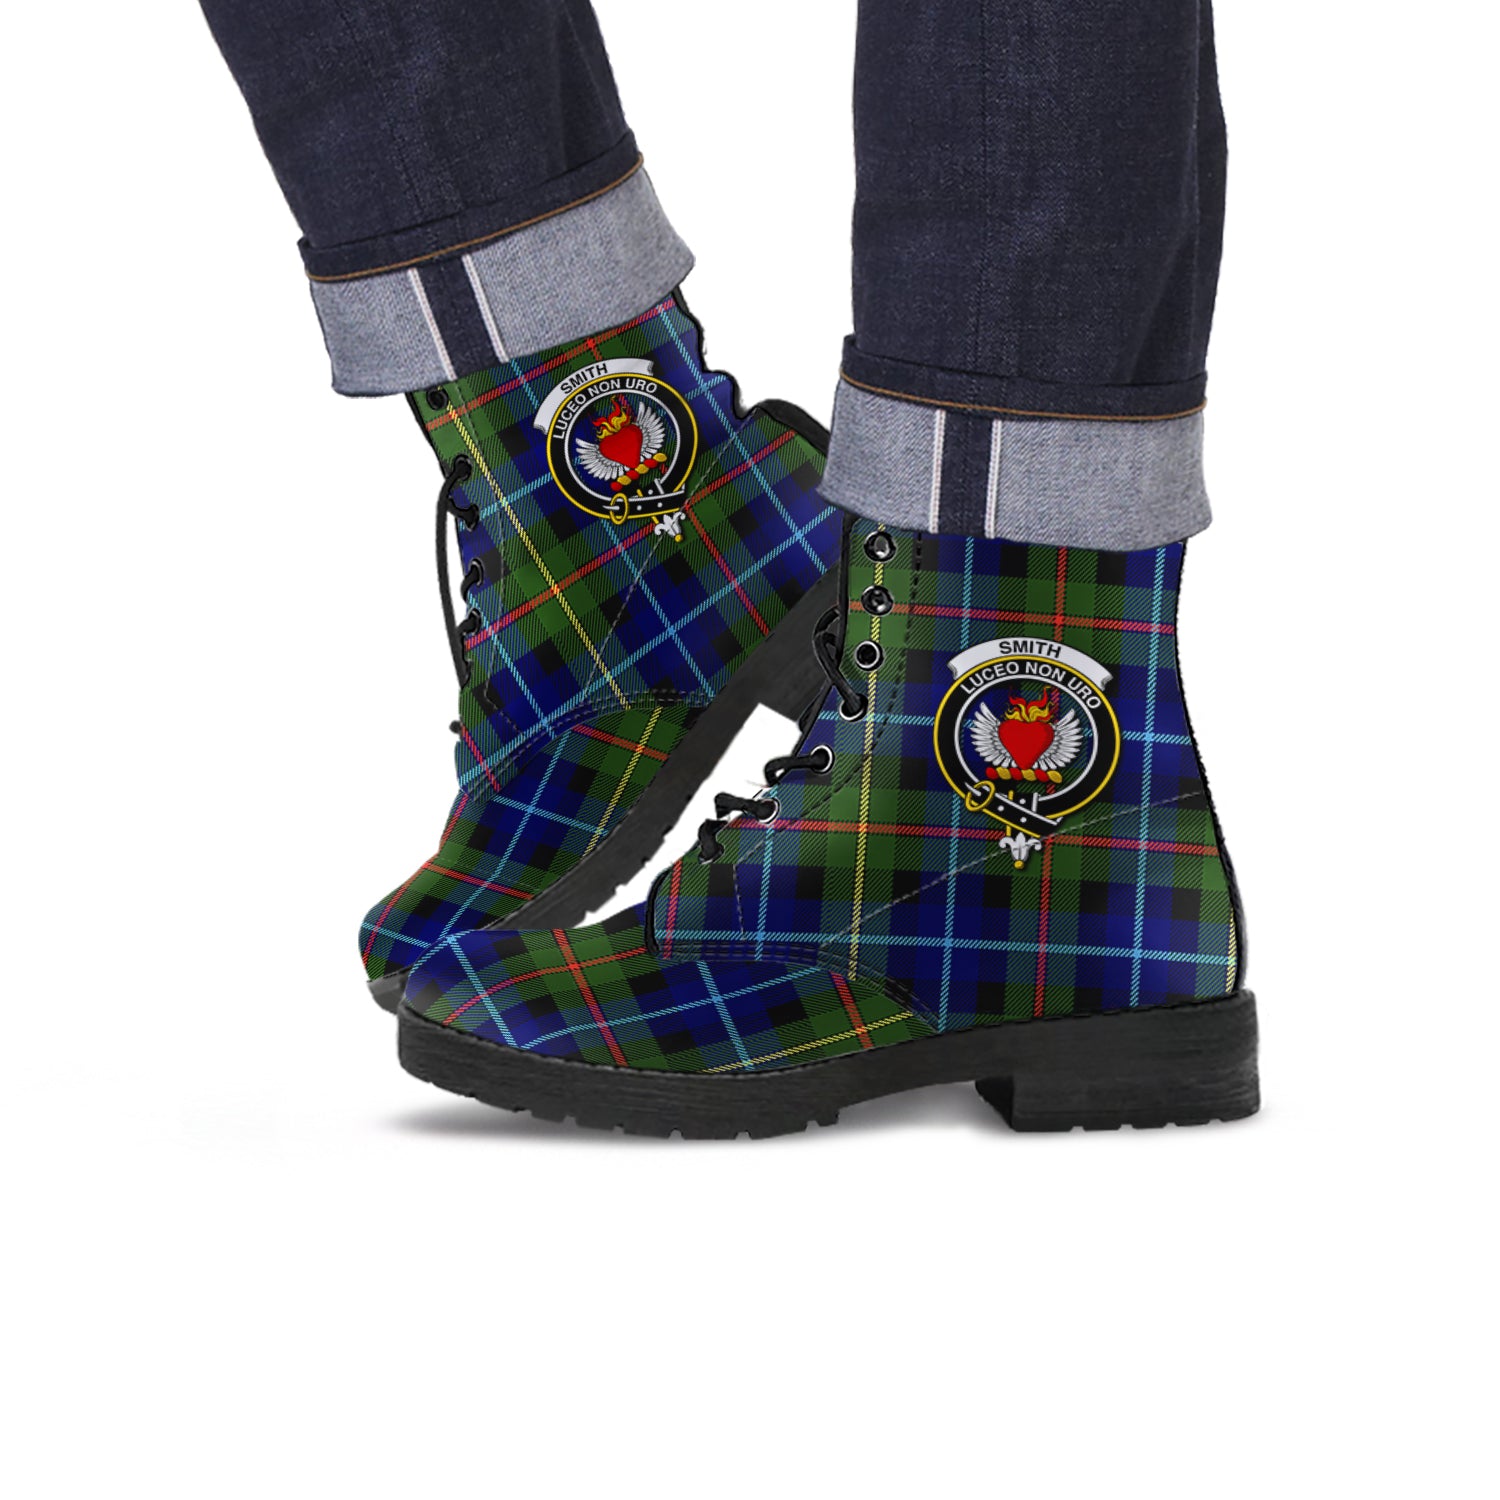 smith-modern-tartan-leather-boots-with-family-crest